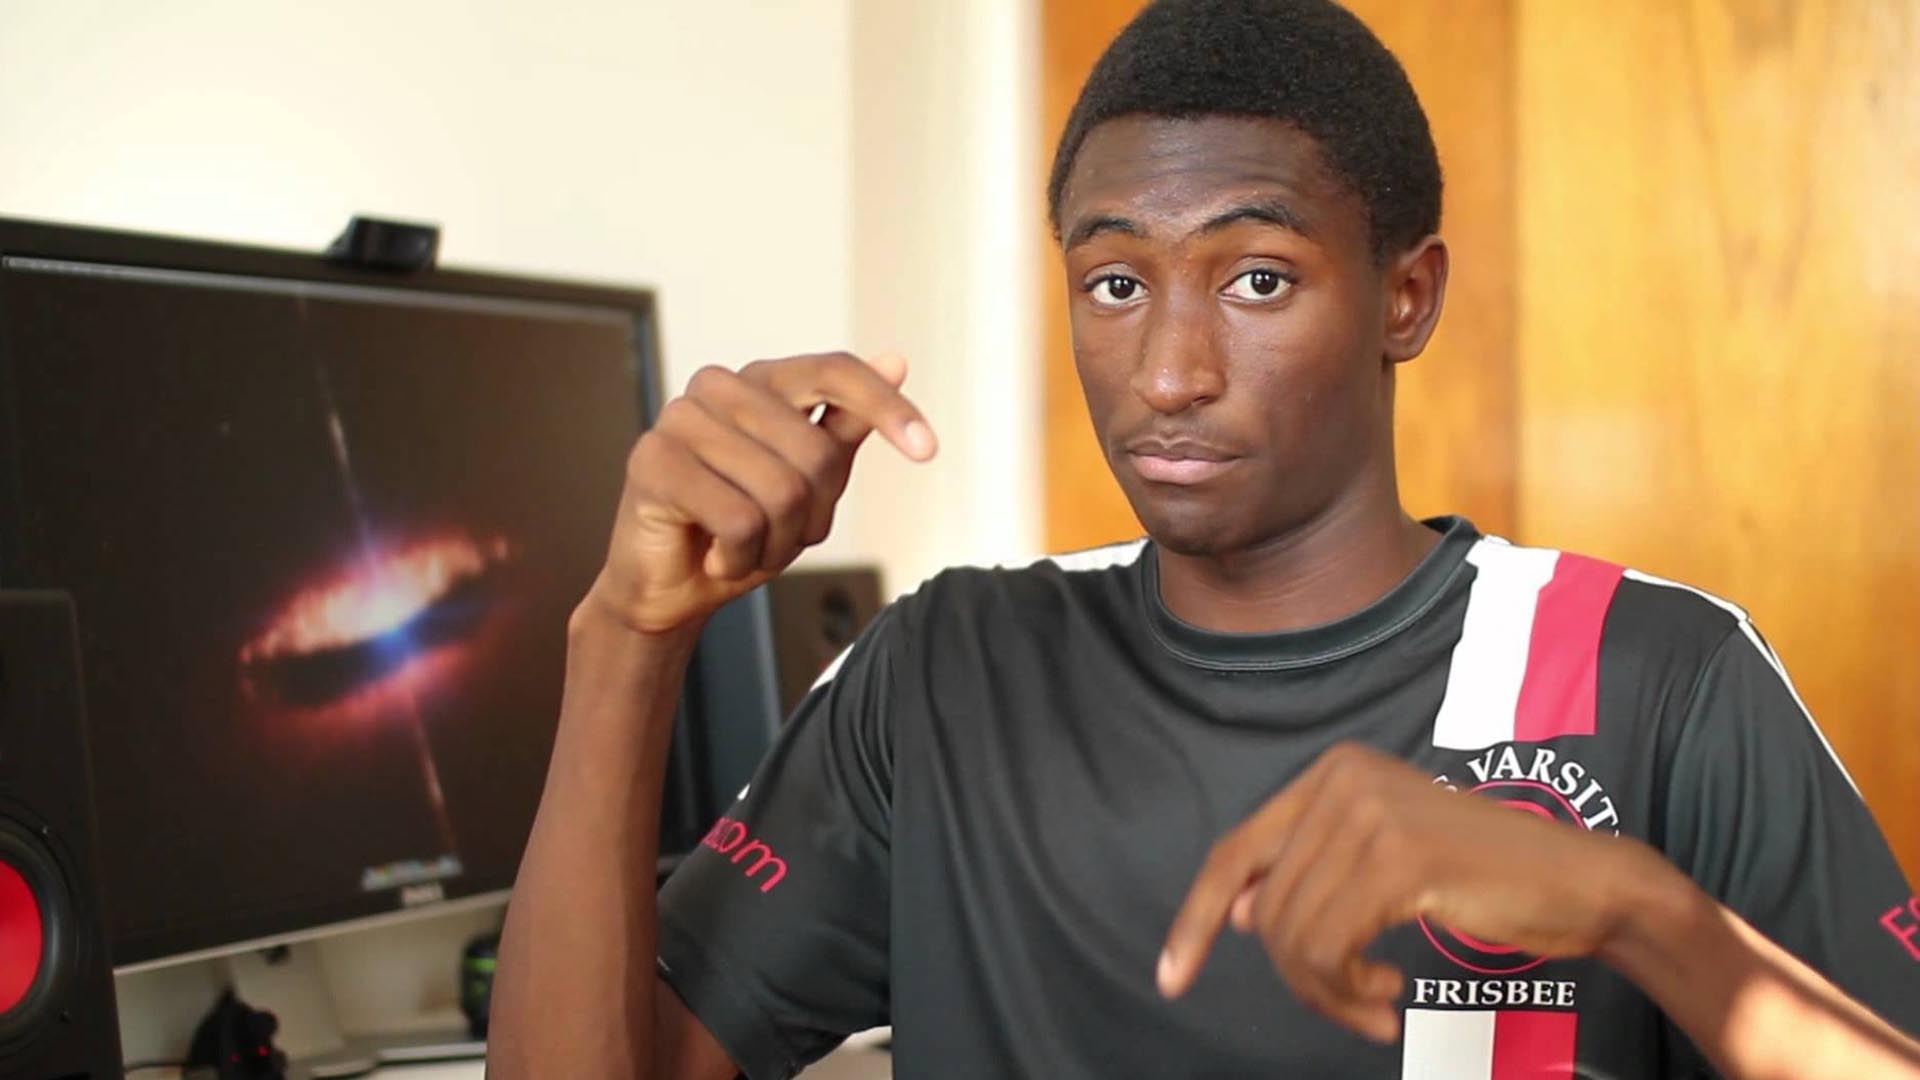 Marques Brownlee, Reddit AMA highlights, Q&A session, Tech discussions, 1920x1080 Full HD Desktop